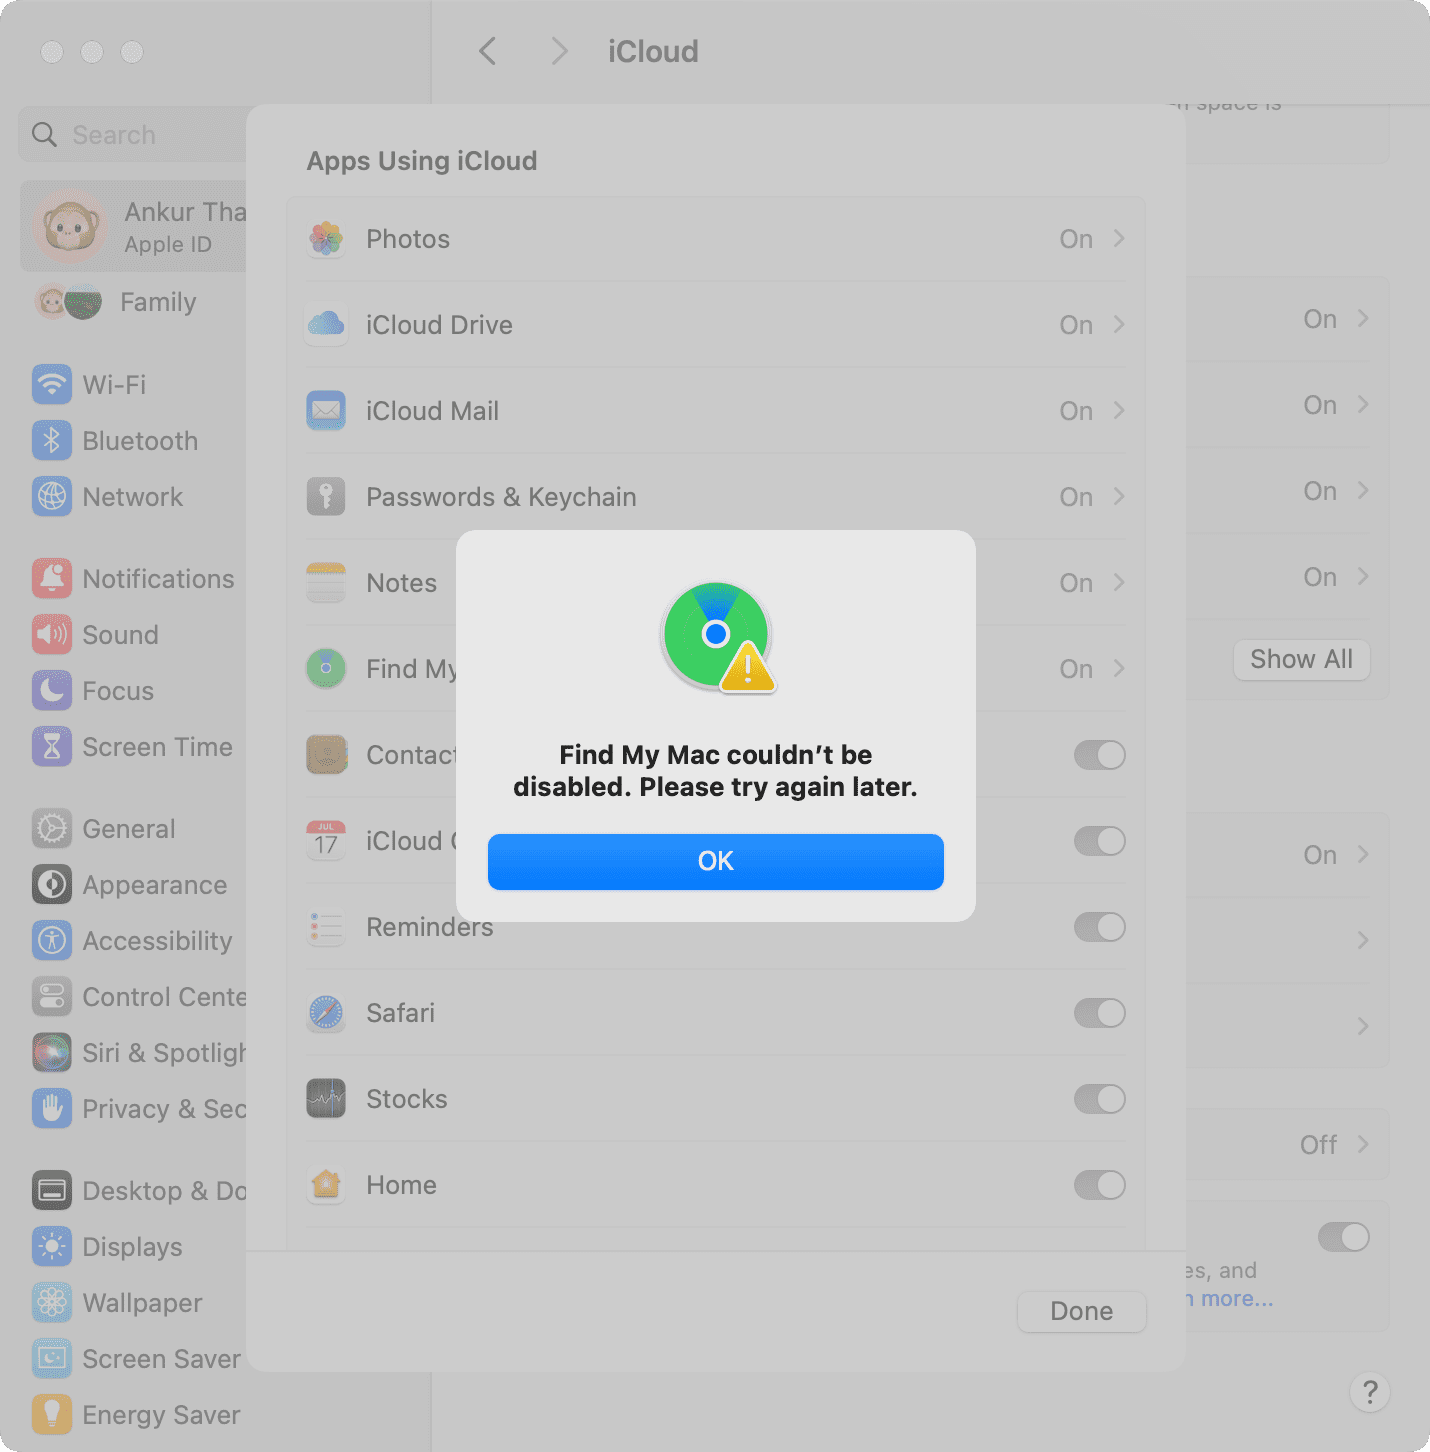 Find My could not be disabled error on Mac